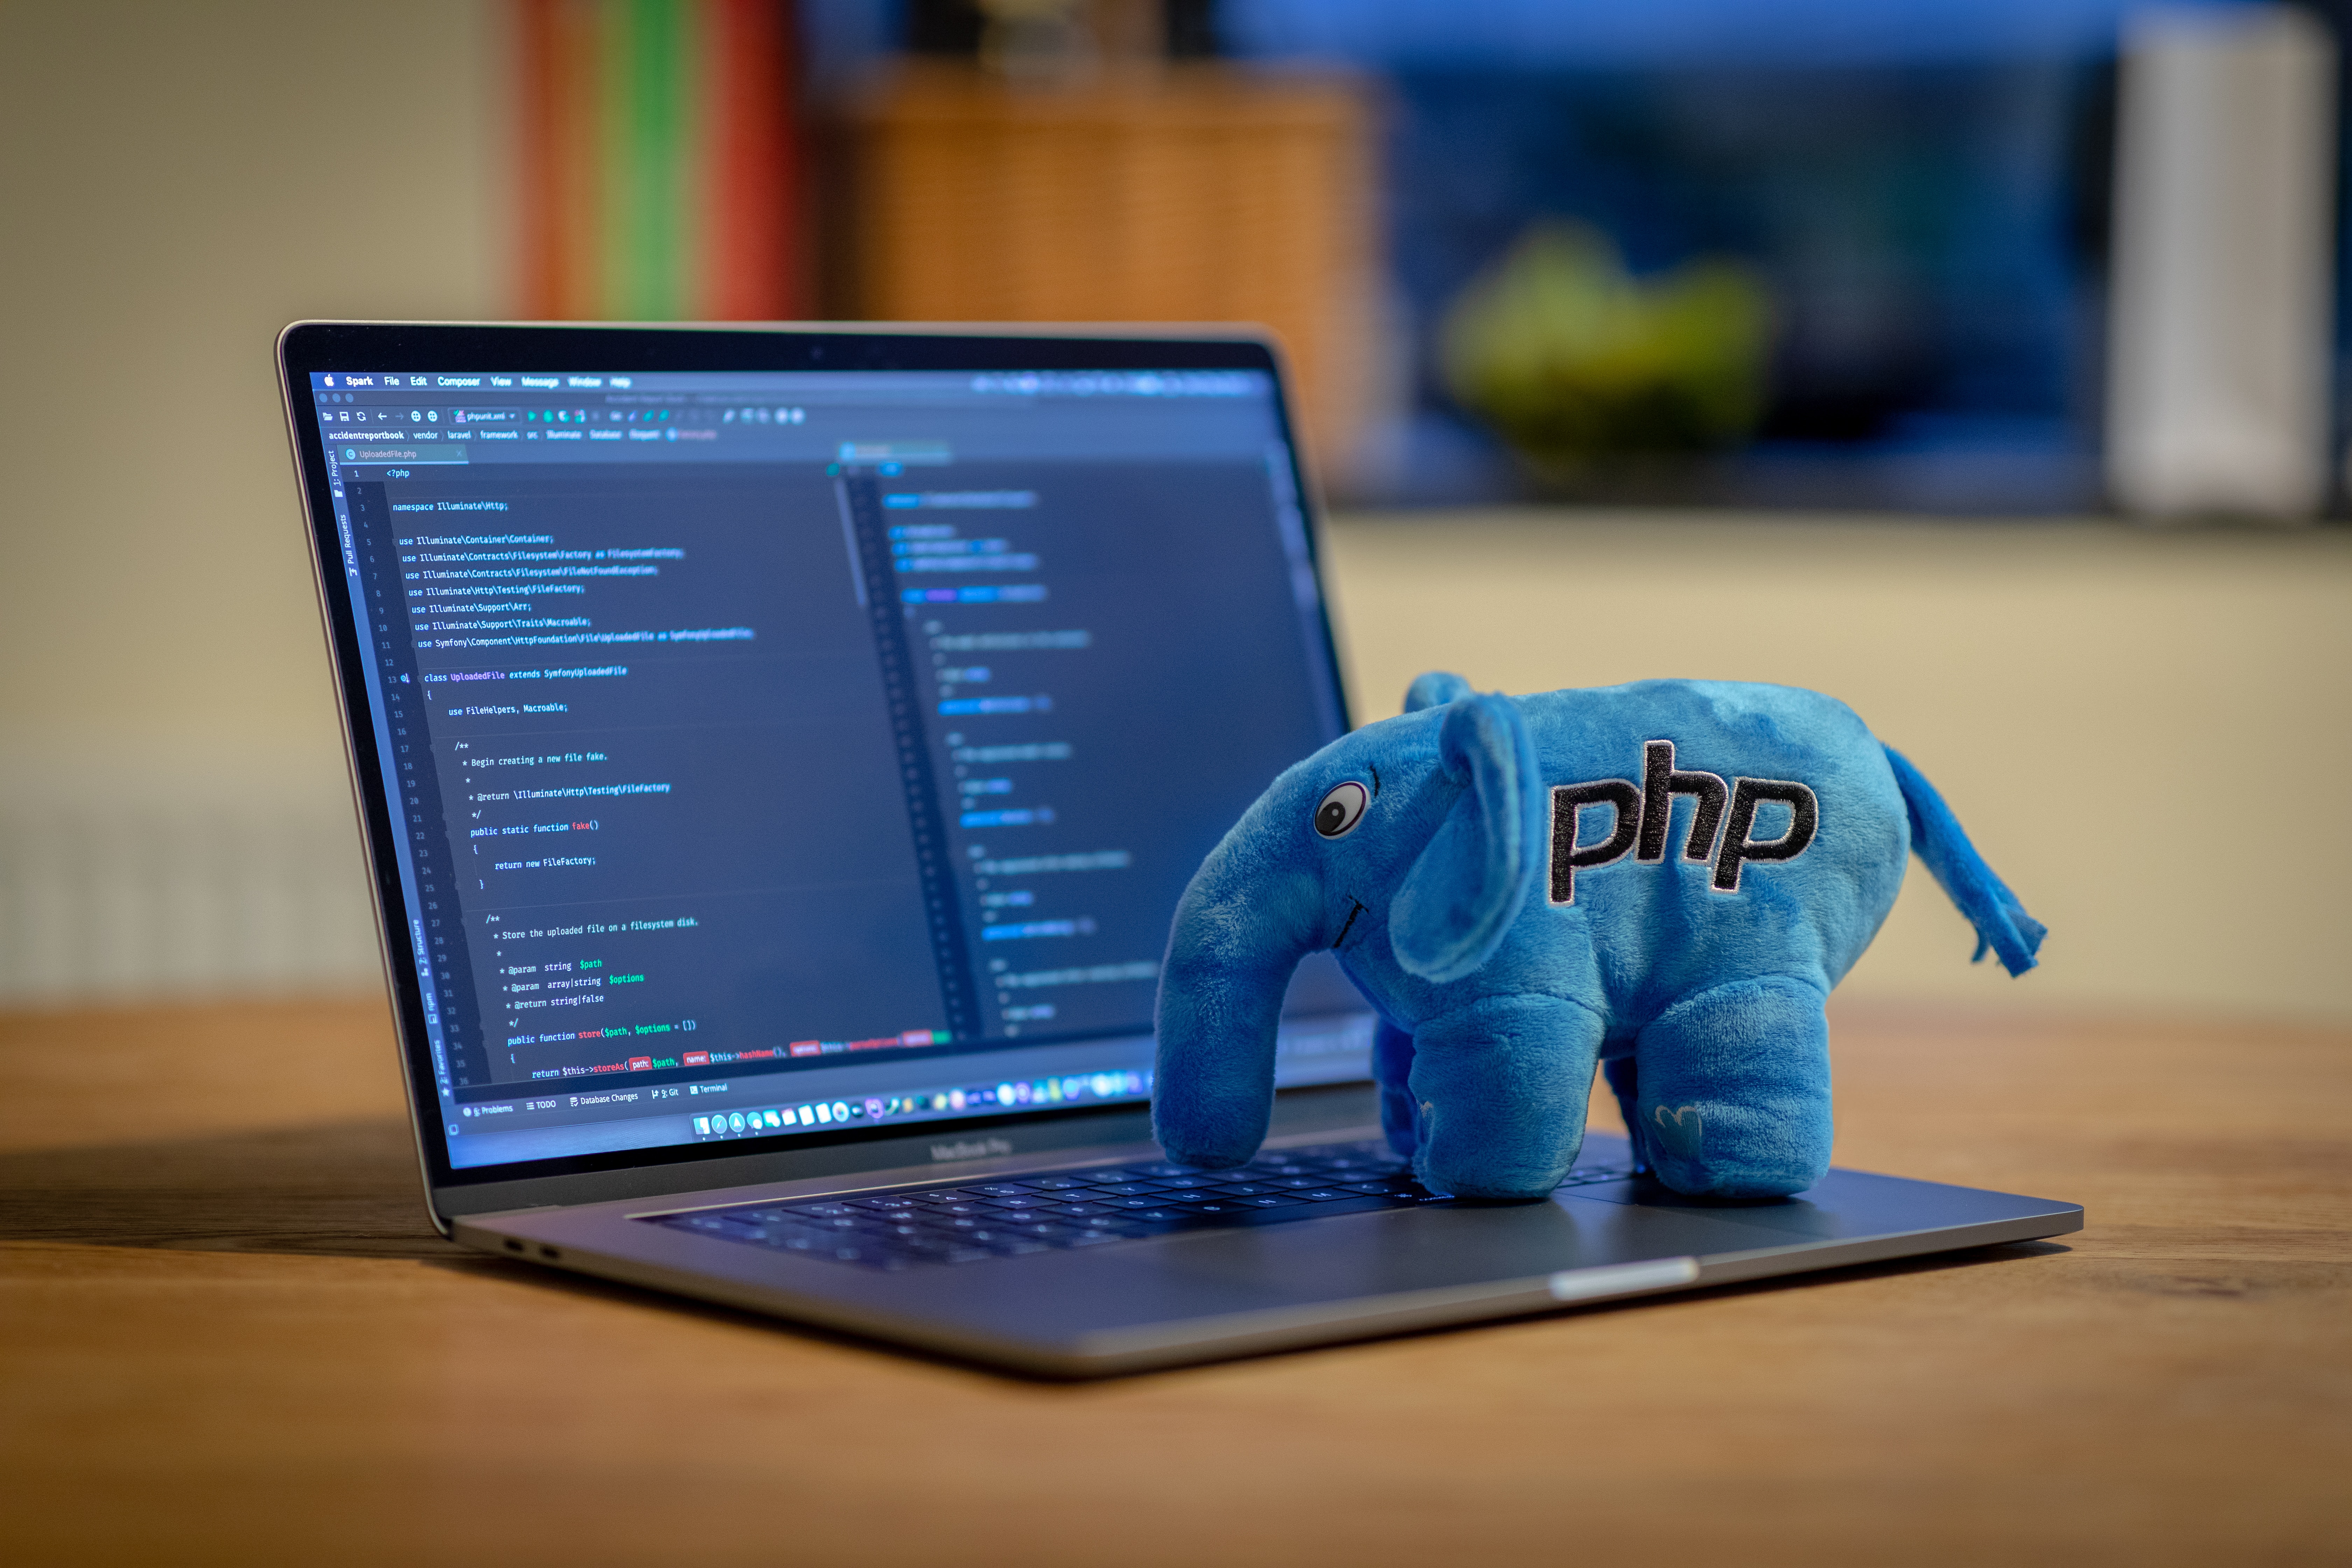 a php elephant mascot stuffie on a laptop computer